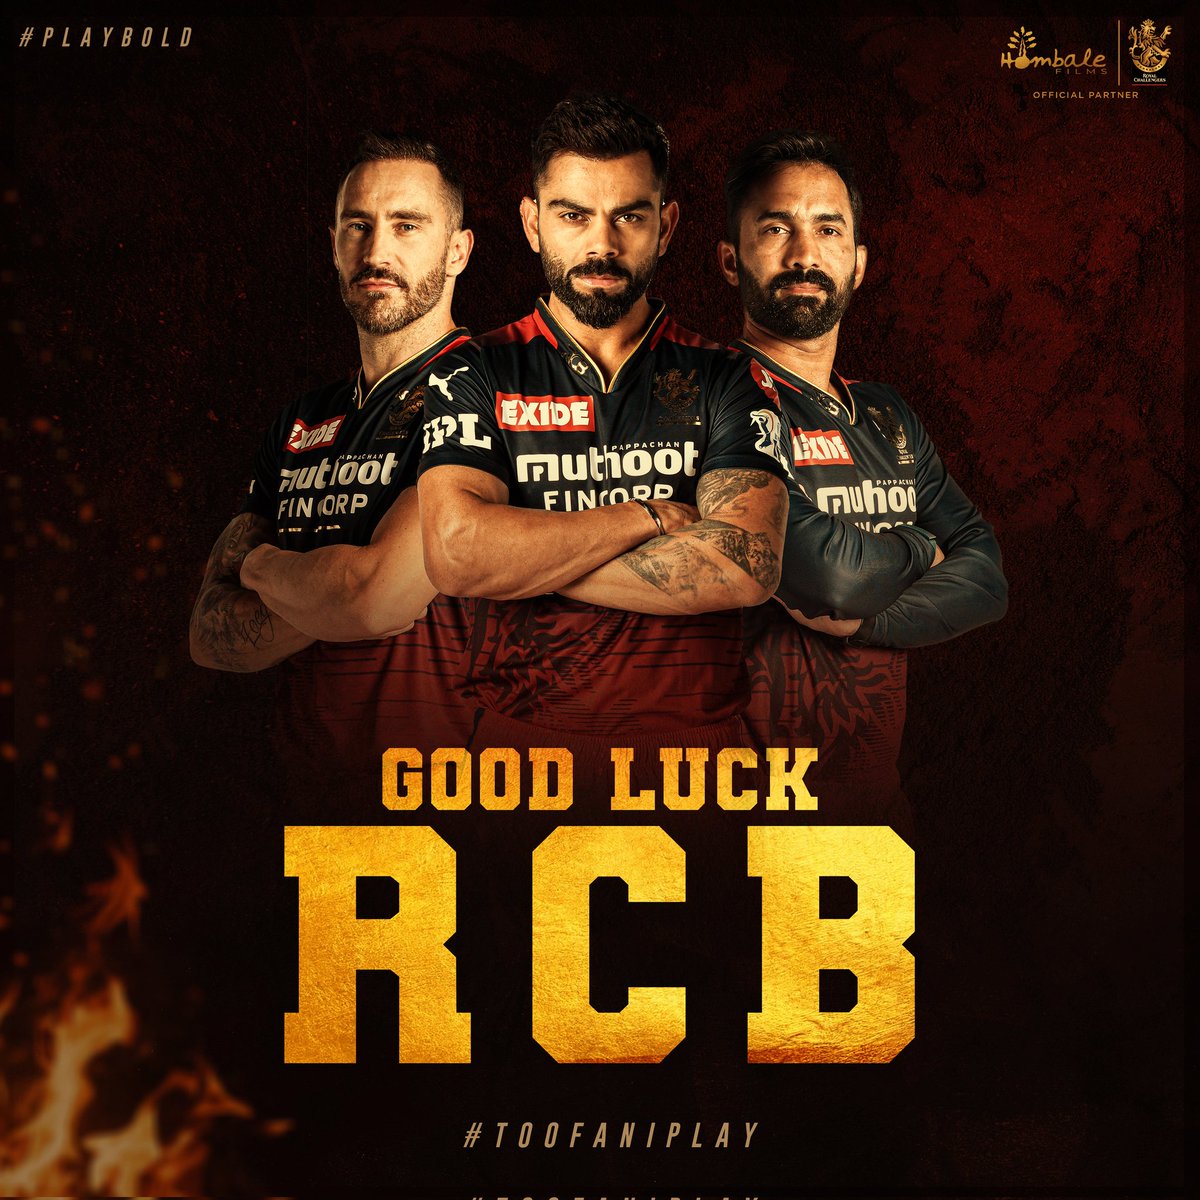 Time to triumph the King and win in a Royal manner @RCBTweets 🌟

@hombalefilms #ನಮ್ಮHombale #ನಮ್ಮRCB #RCBxHombale #PlayBold #PlayToofani #KGFChapter2